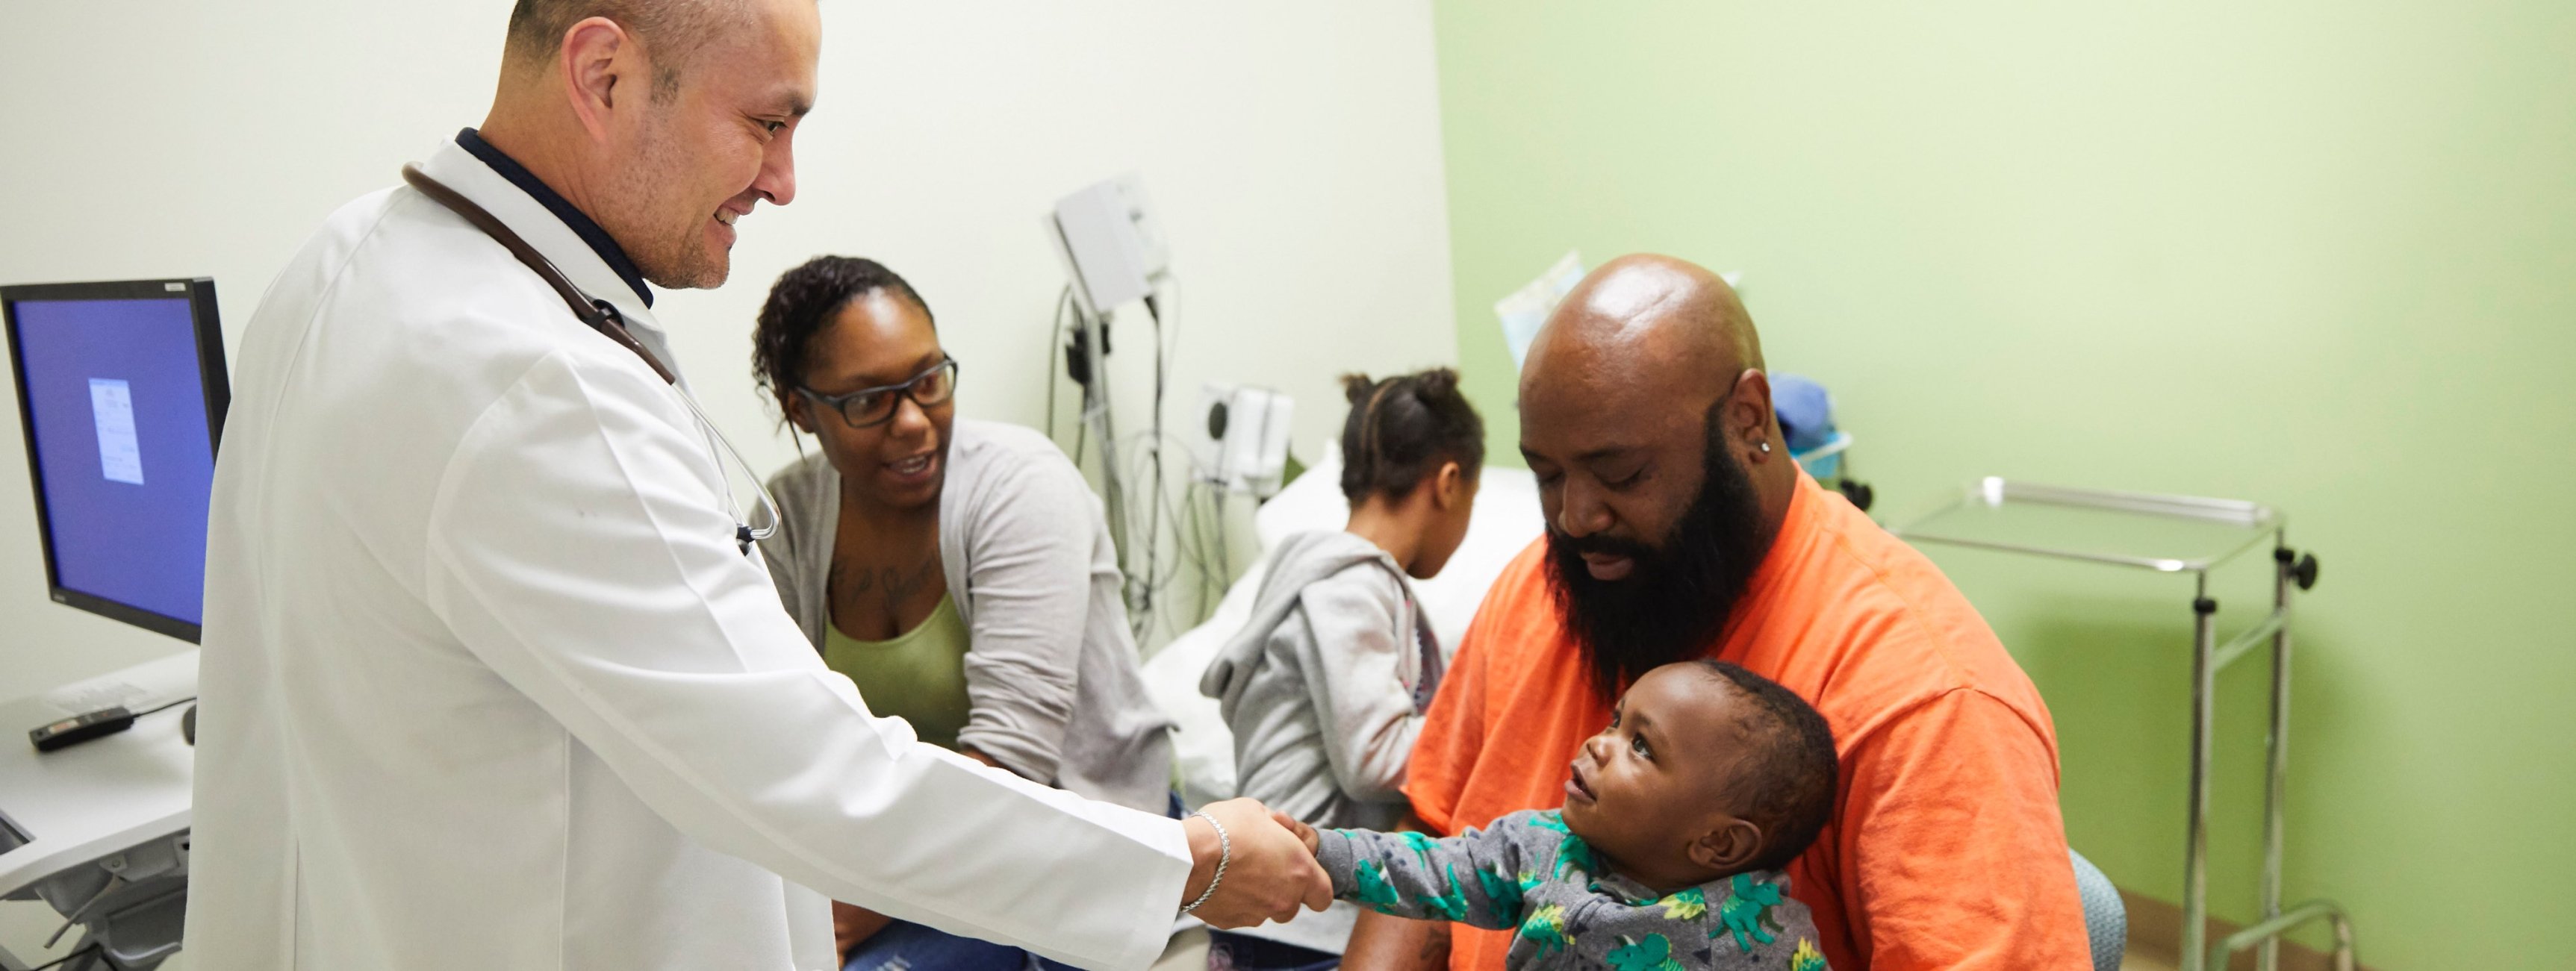 Latino doctor holding hand of Black baby sitting in father's lap as mother looks on 